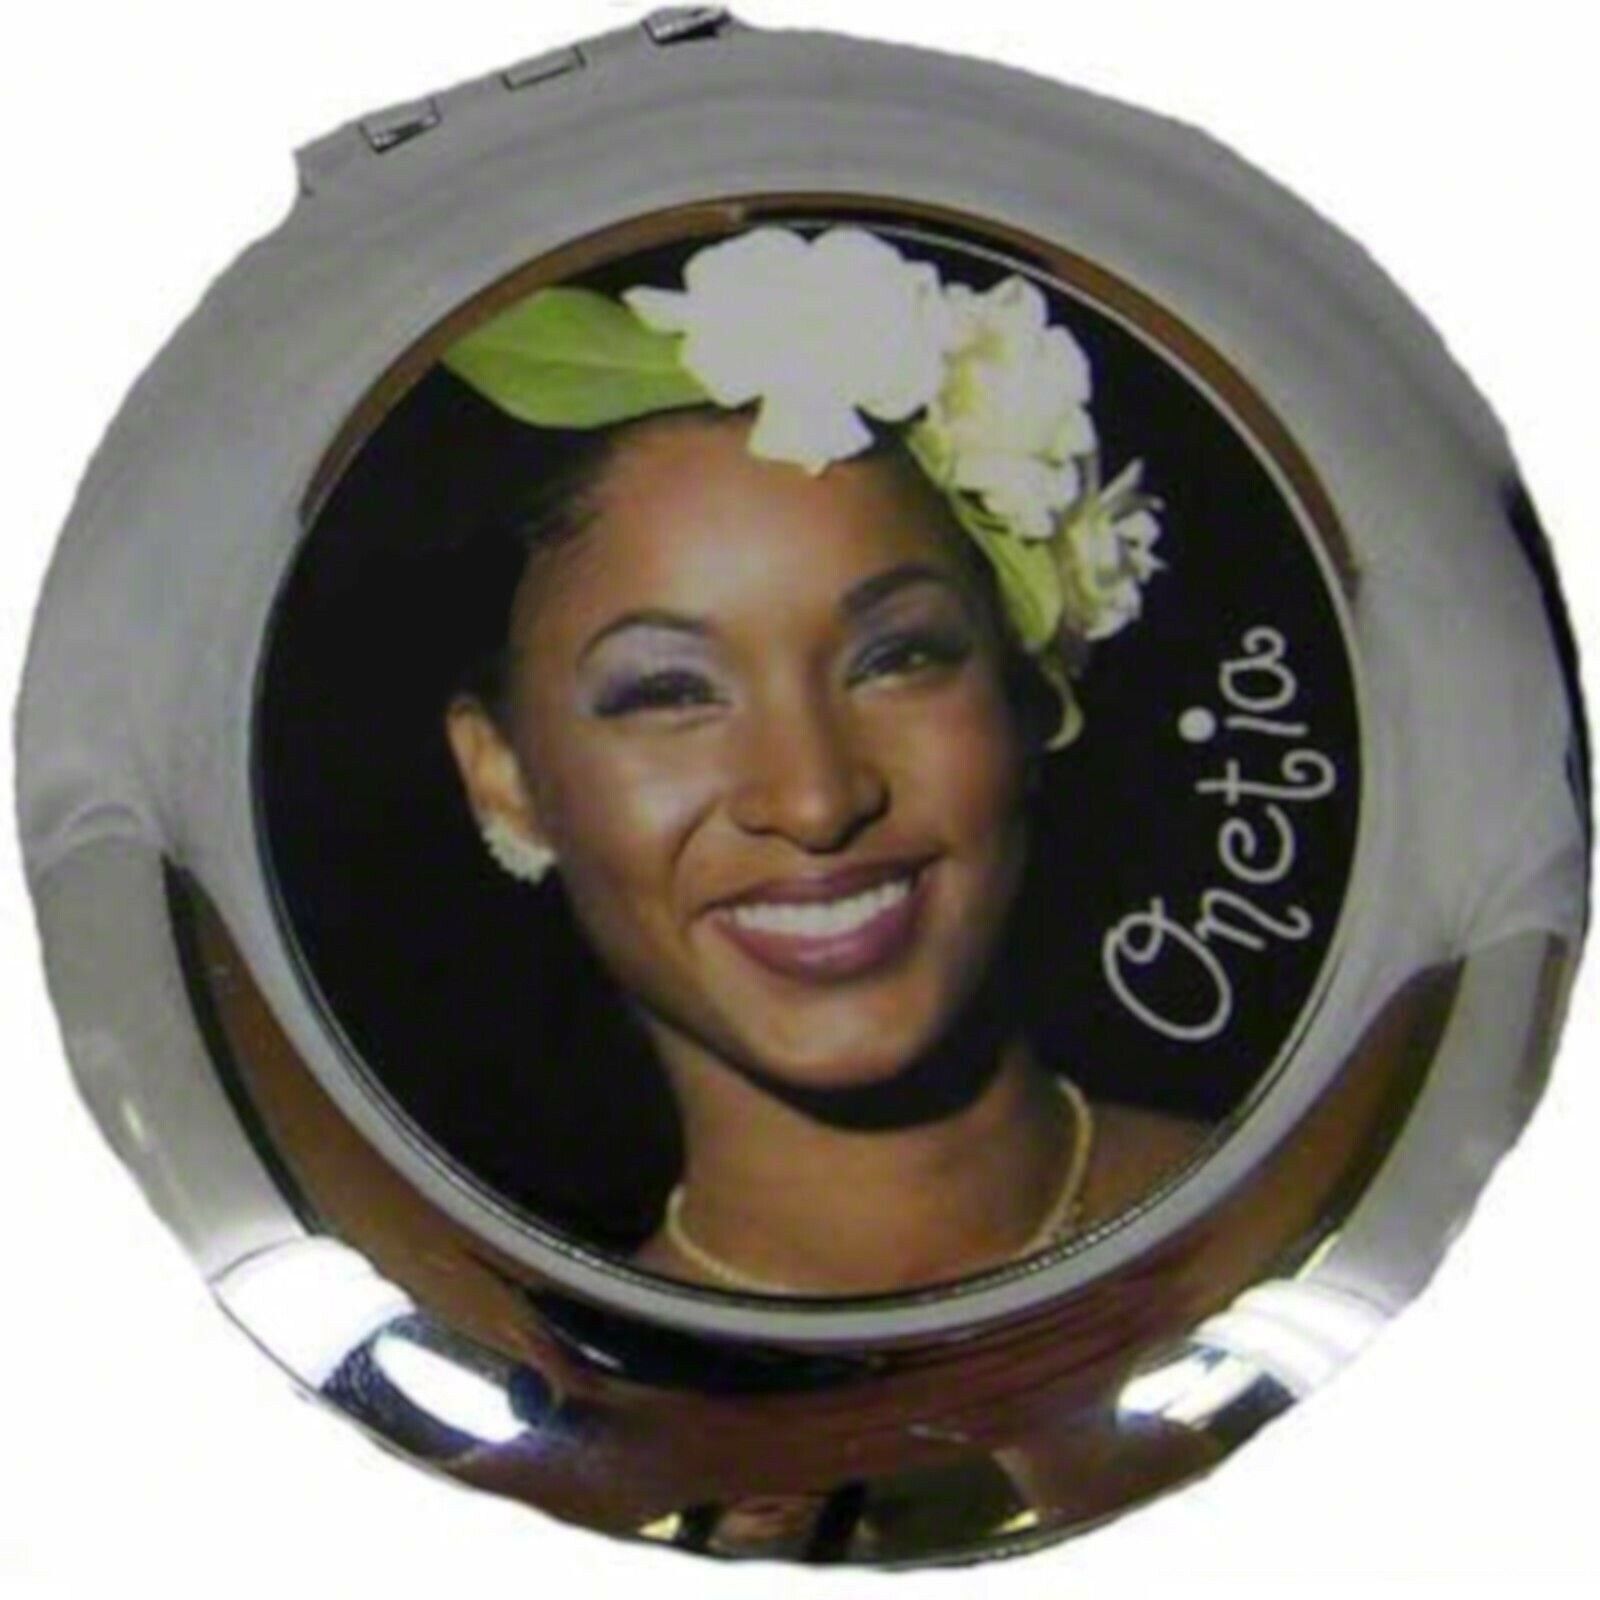 Personalized Custom Metal Round Shaped Compact Mirror Any Image Can B Applied